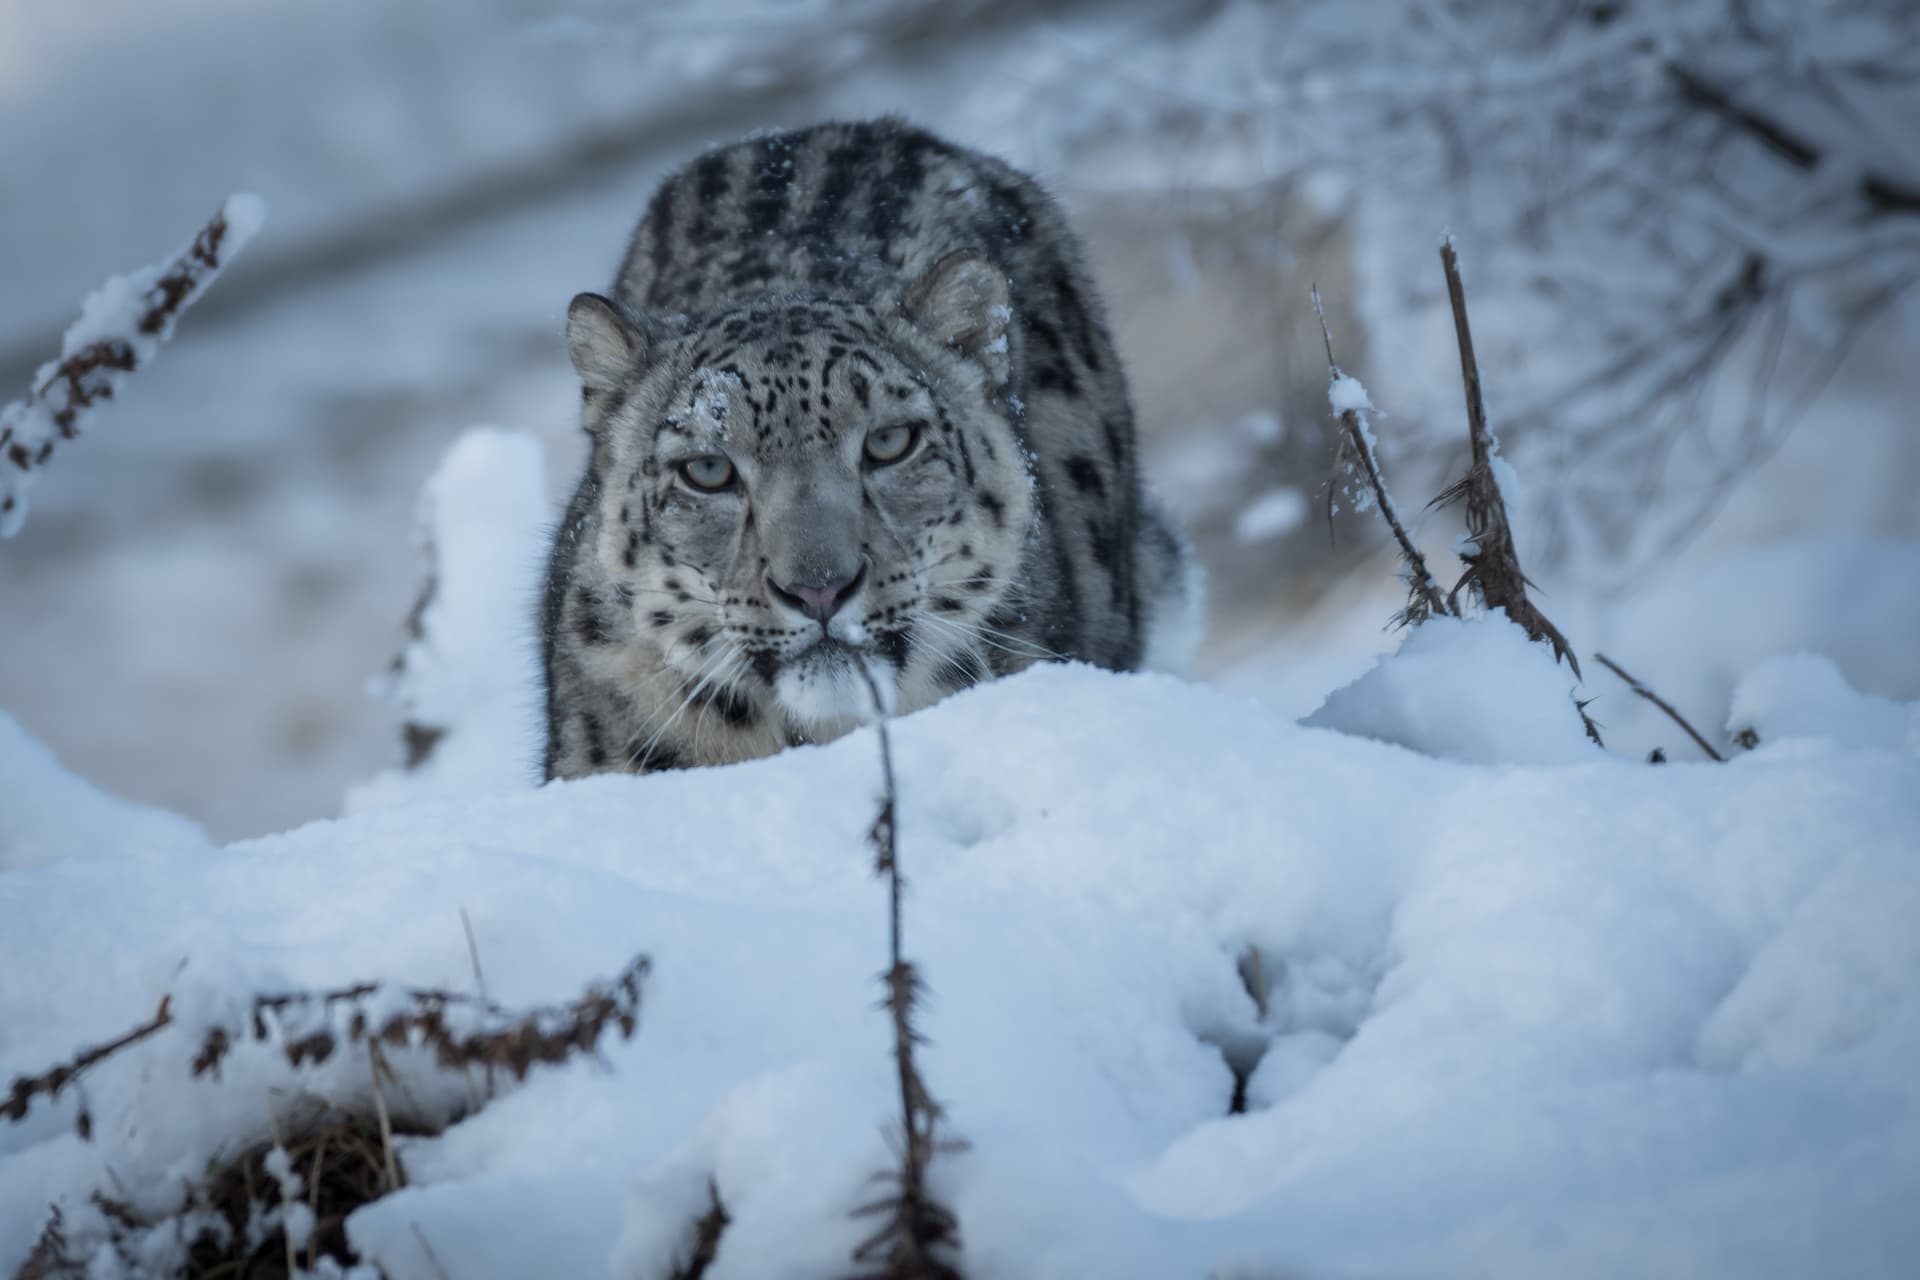 Snow leopard Koshi stood on a snowy hillside looking at the camera [EYE CONTACT] IMAGE: Alyson Houston 2021